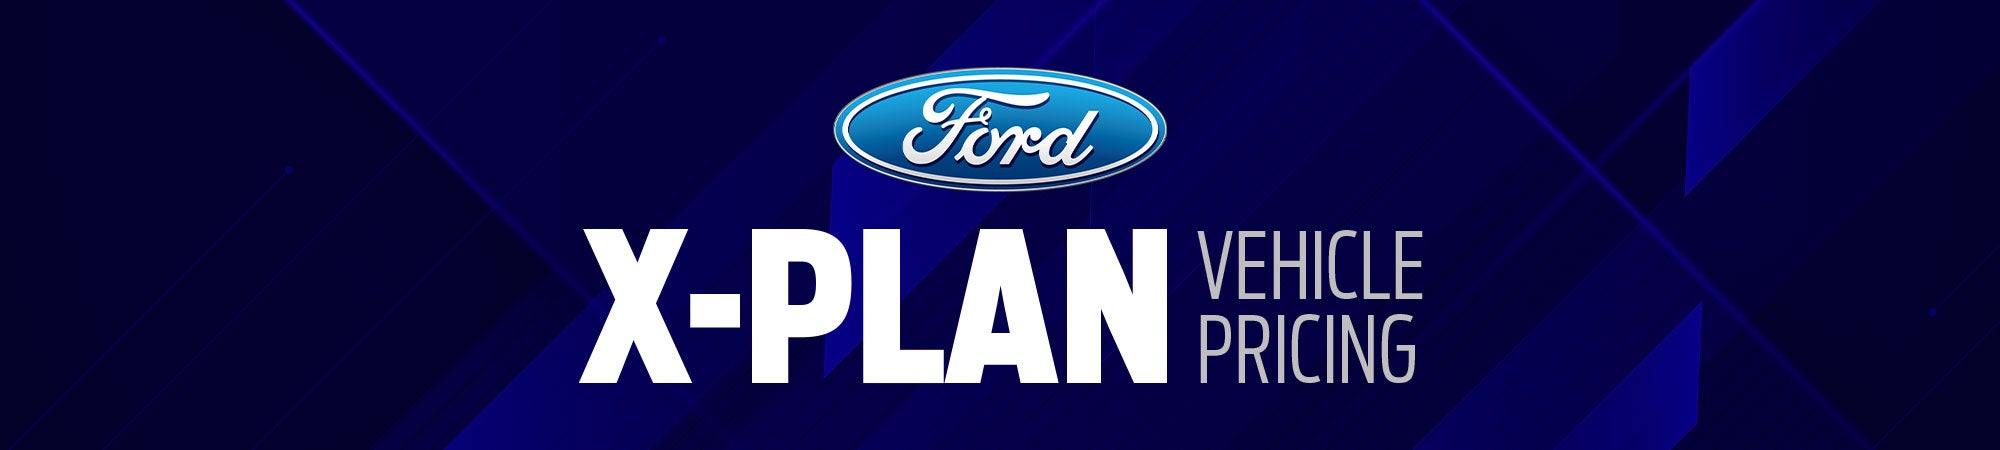 Ford X-Plan Vehicle Pricing